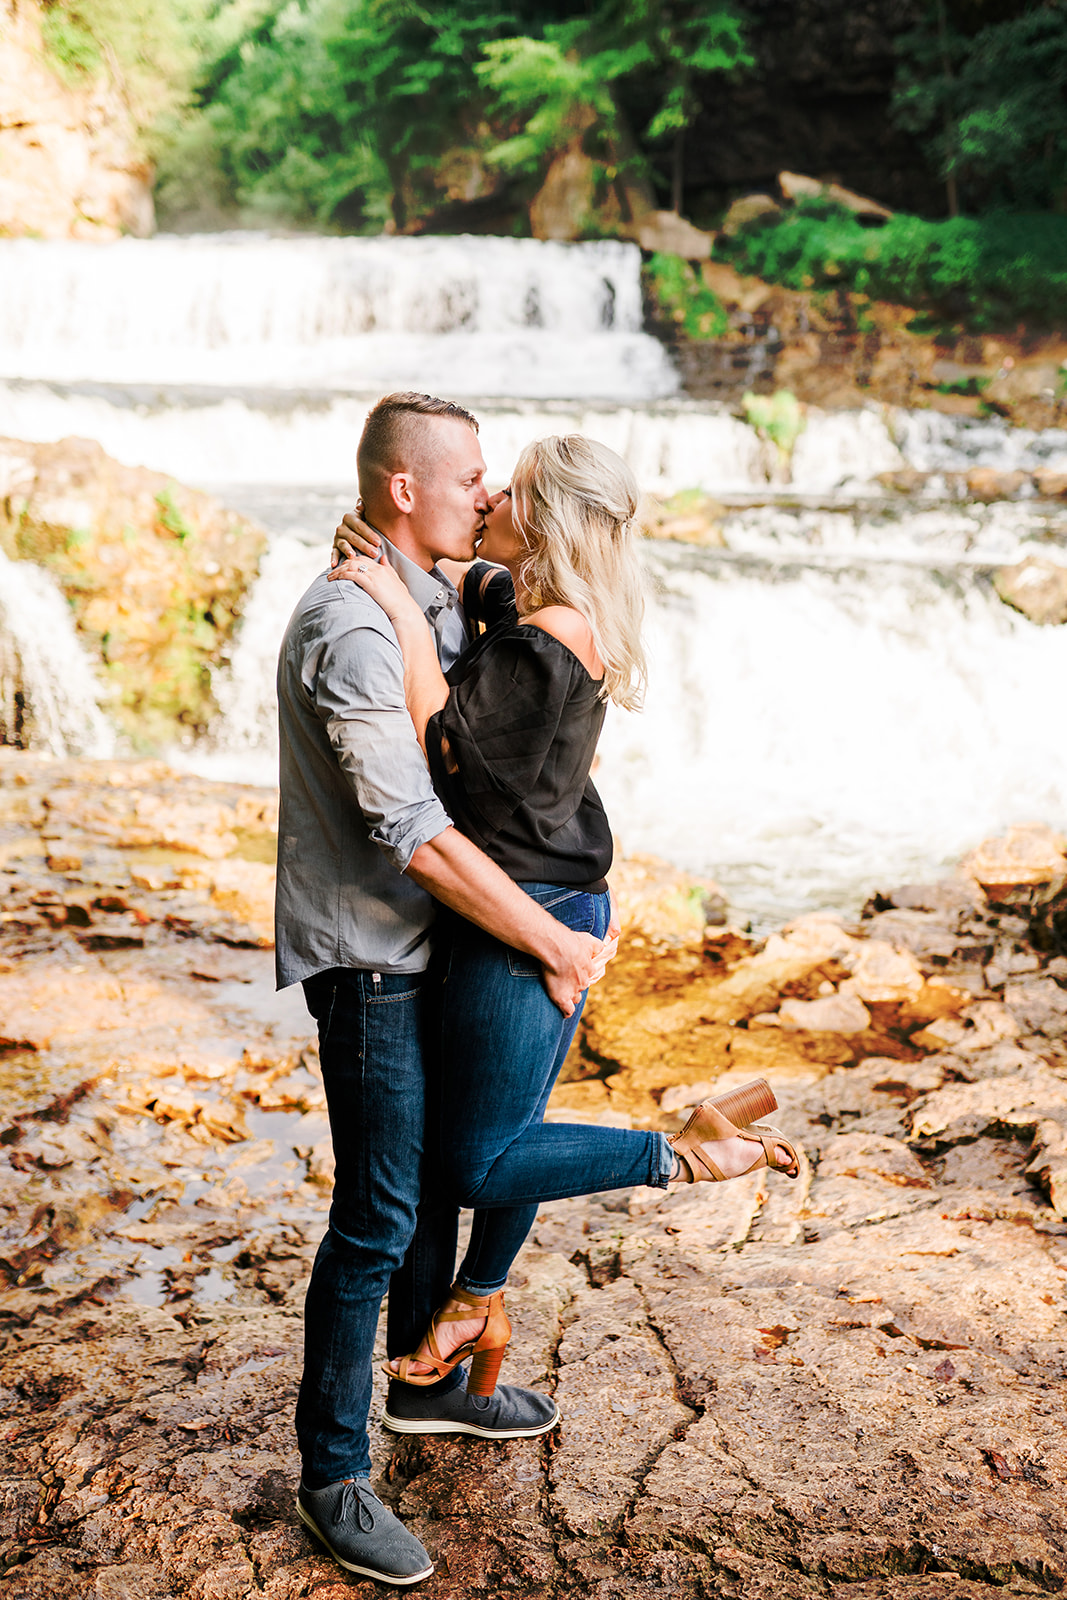 Two couples share intimate kisses against the backdrop of a cascading waterfall. The rushing water creates a serene ambiance as the couples express their affection, surrounded by the beauty of nature.